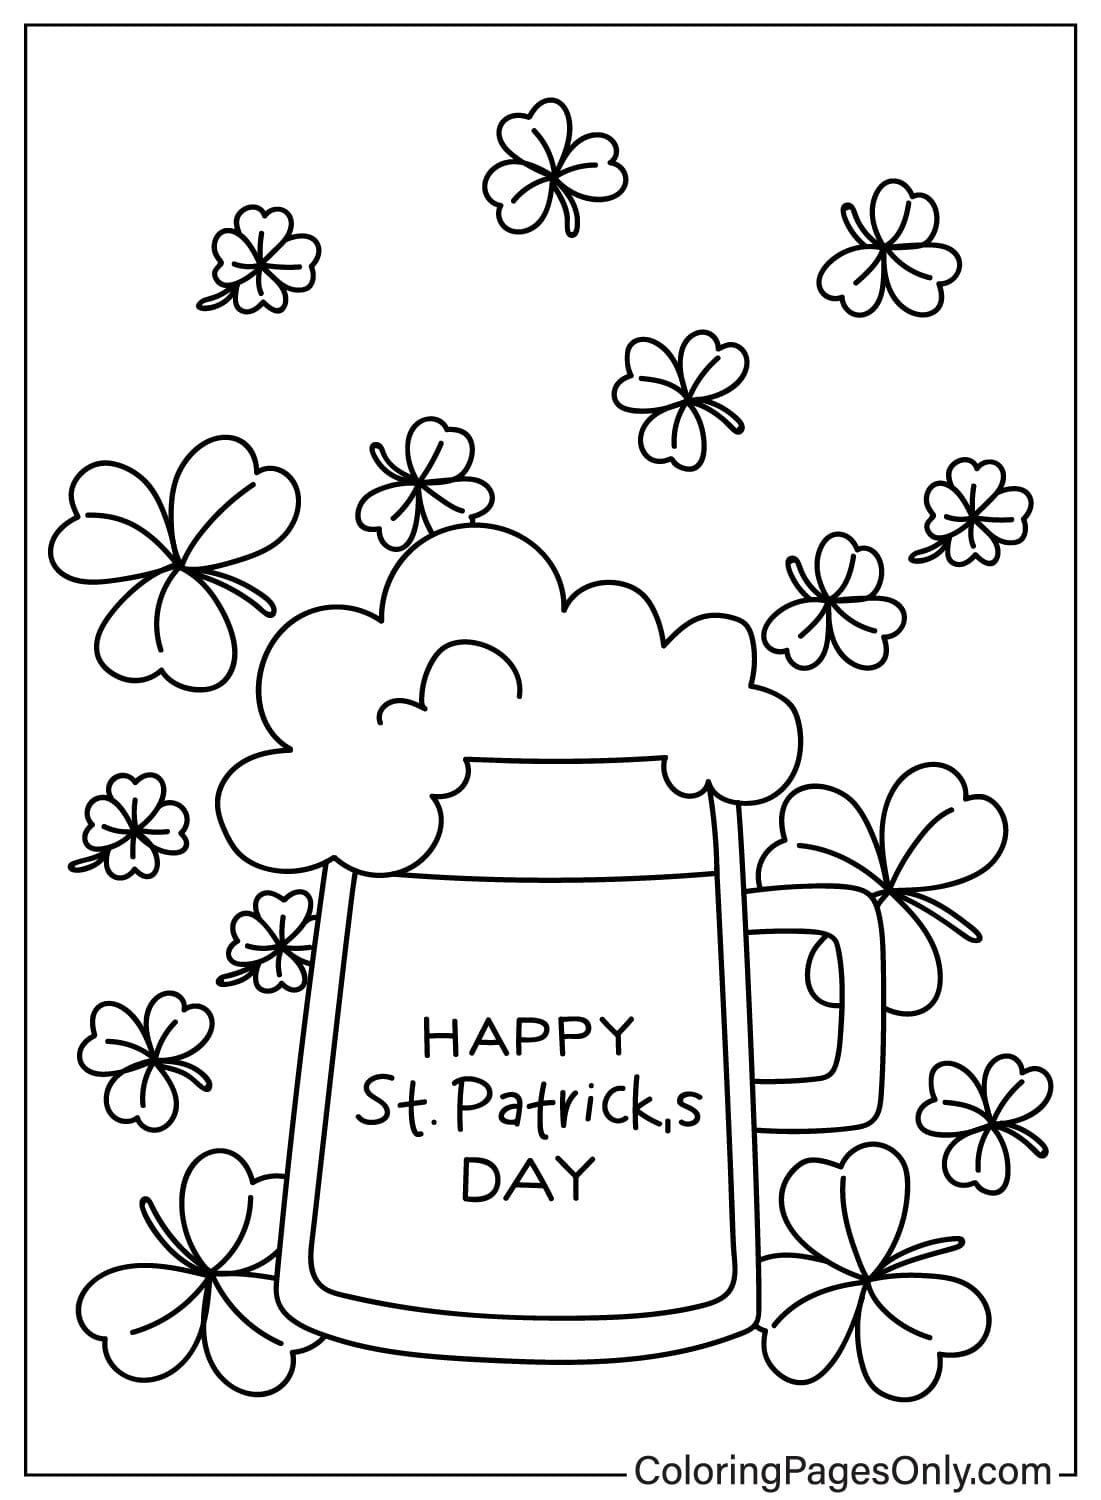 Happy St. Patricks Day Coloring Book